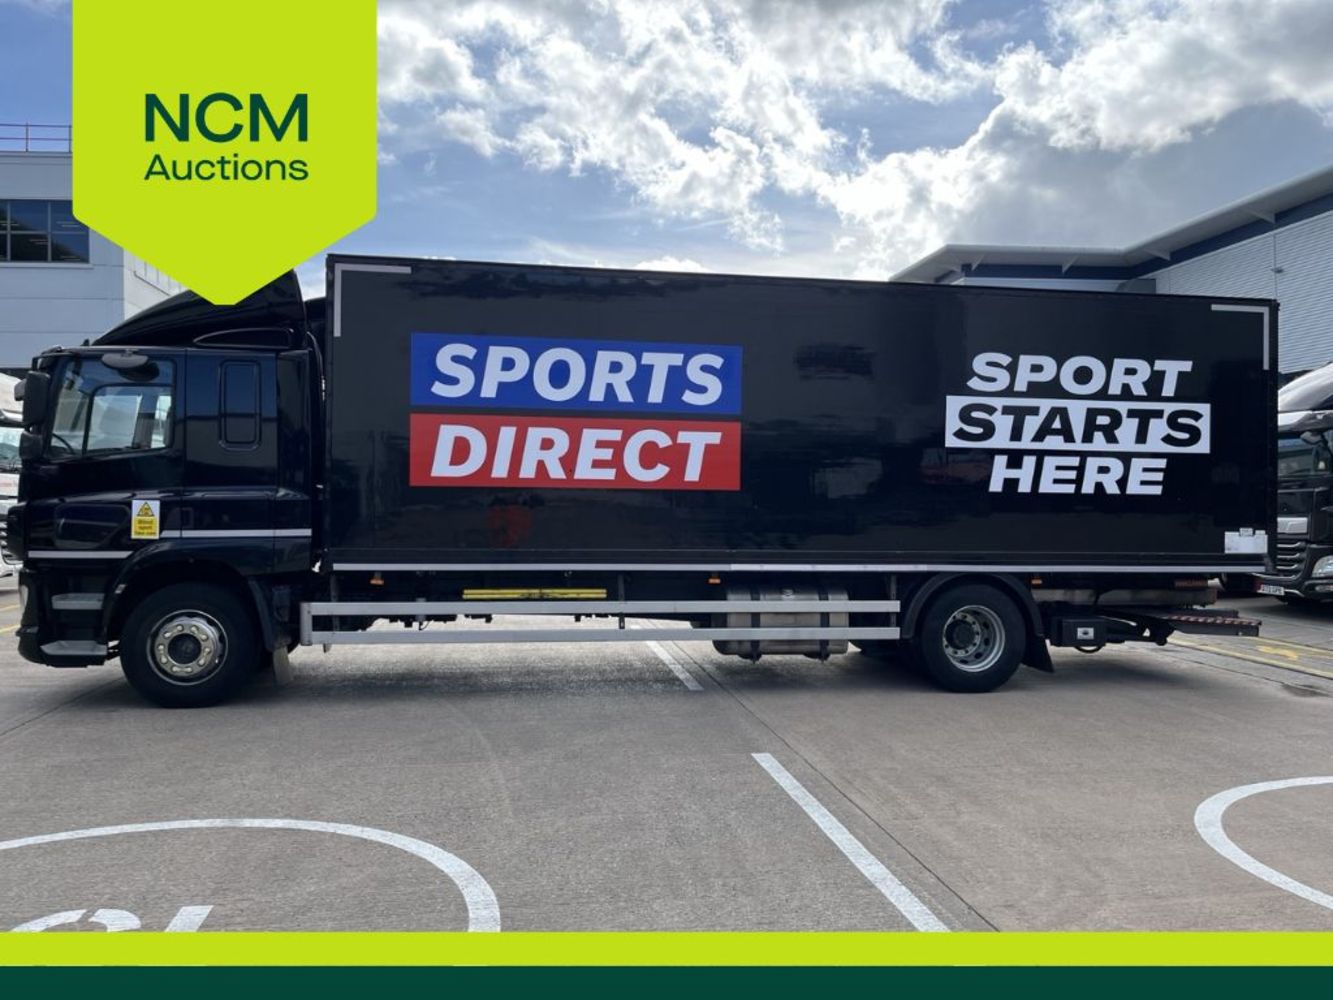 Plant, Machinery & Commercial Vehicles - Featuring 40ft Shipping Containers &  5 x 18 Ton - DAF Rigid Trucks from Retained Client, SPORTS DIRECT